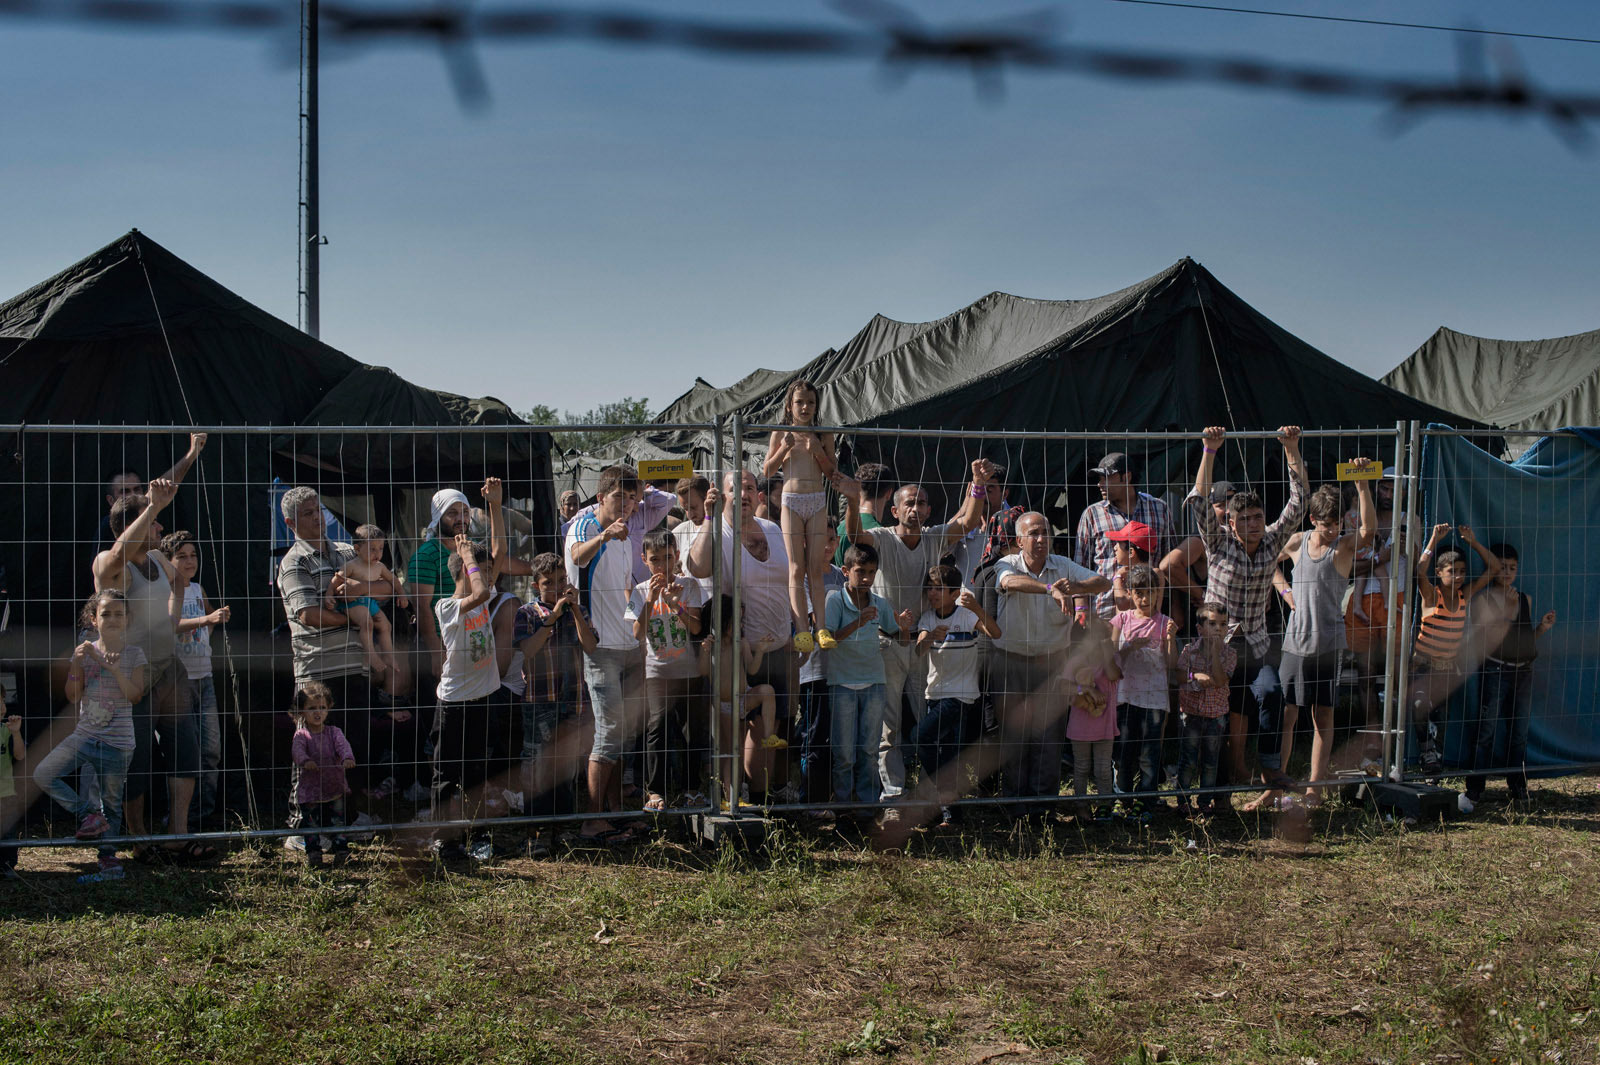 A group of migrants waits at a makeshift detention camp for Hungarian authorities to register their arrival in the European Union.
                      Roszke, Hungary, Aug. 29, 2015. (Yuri Kozyrev—NOOR for TIME)